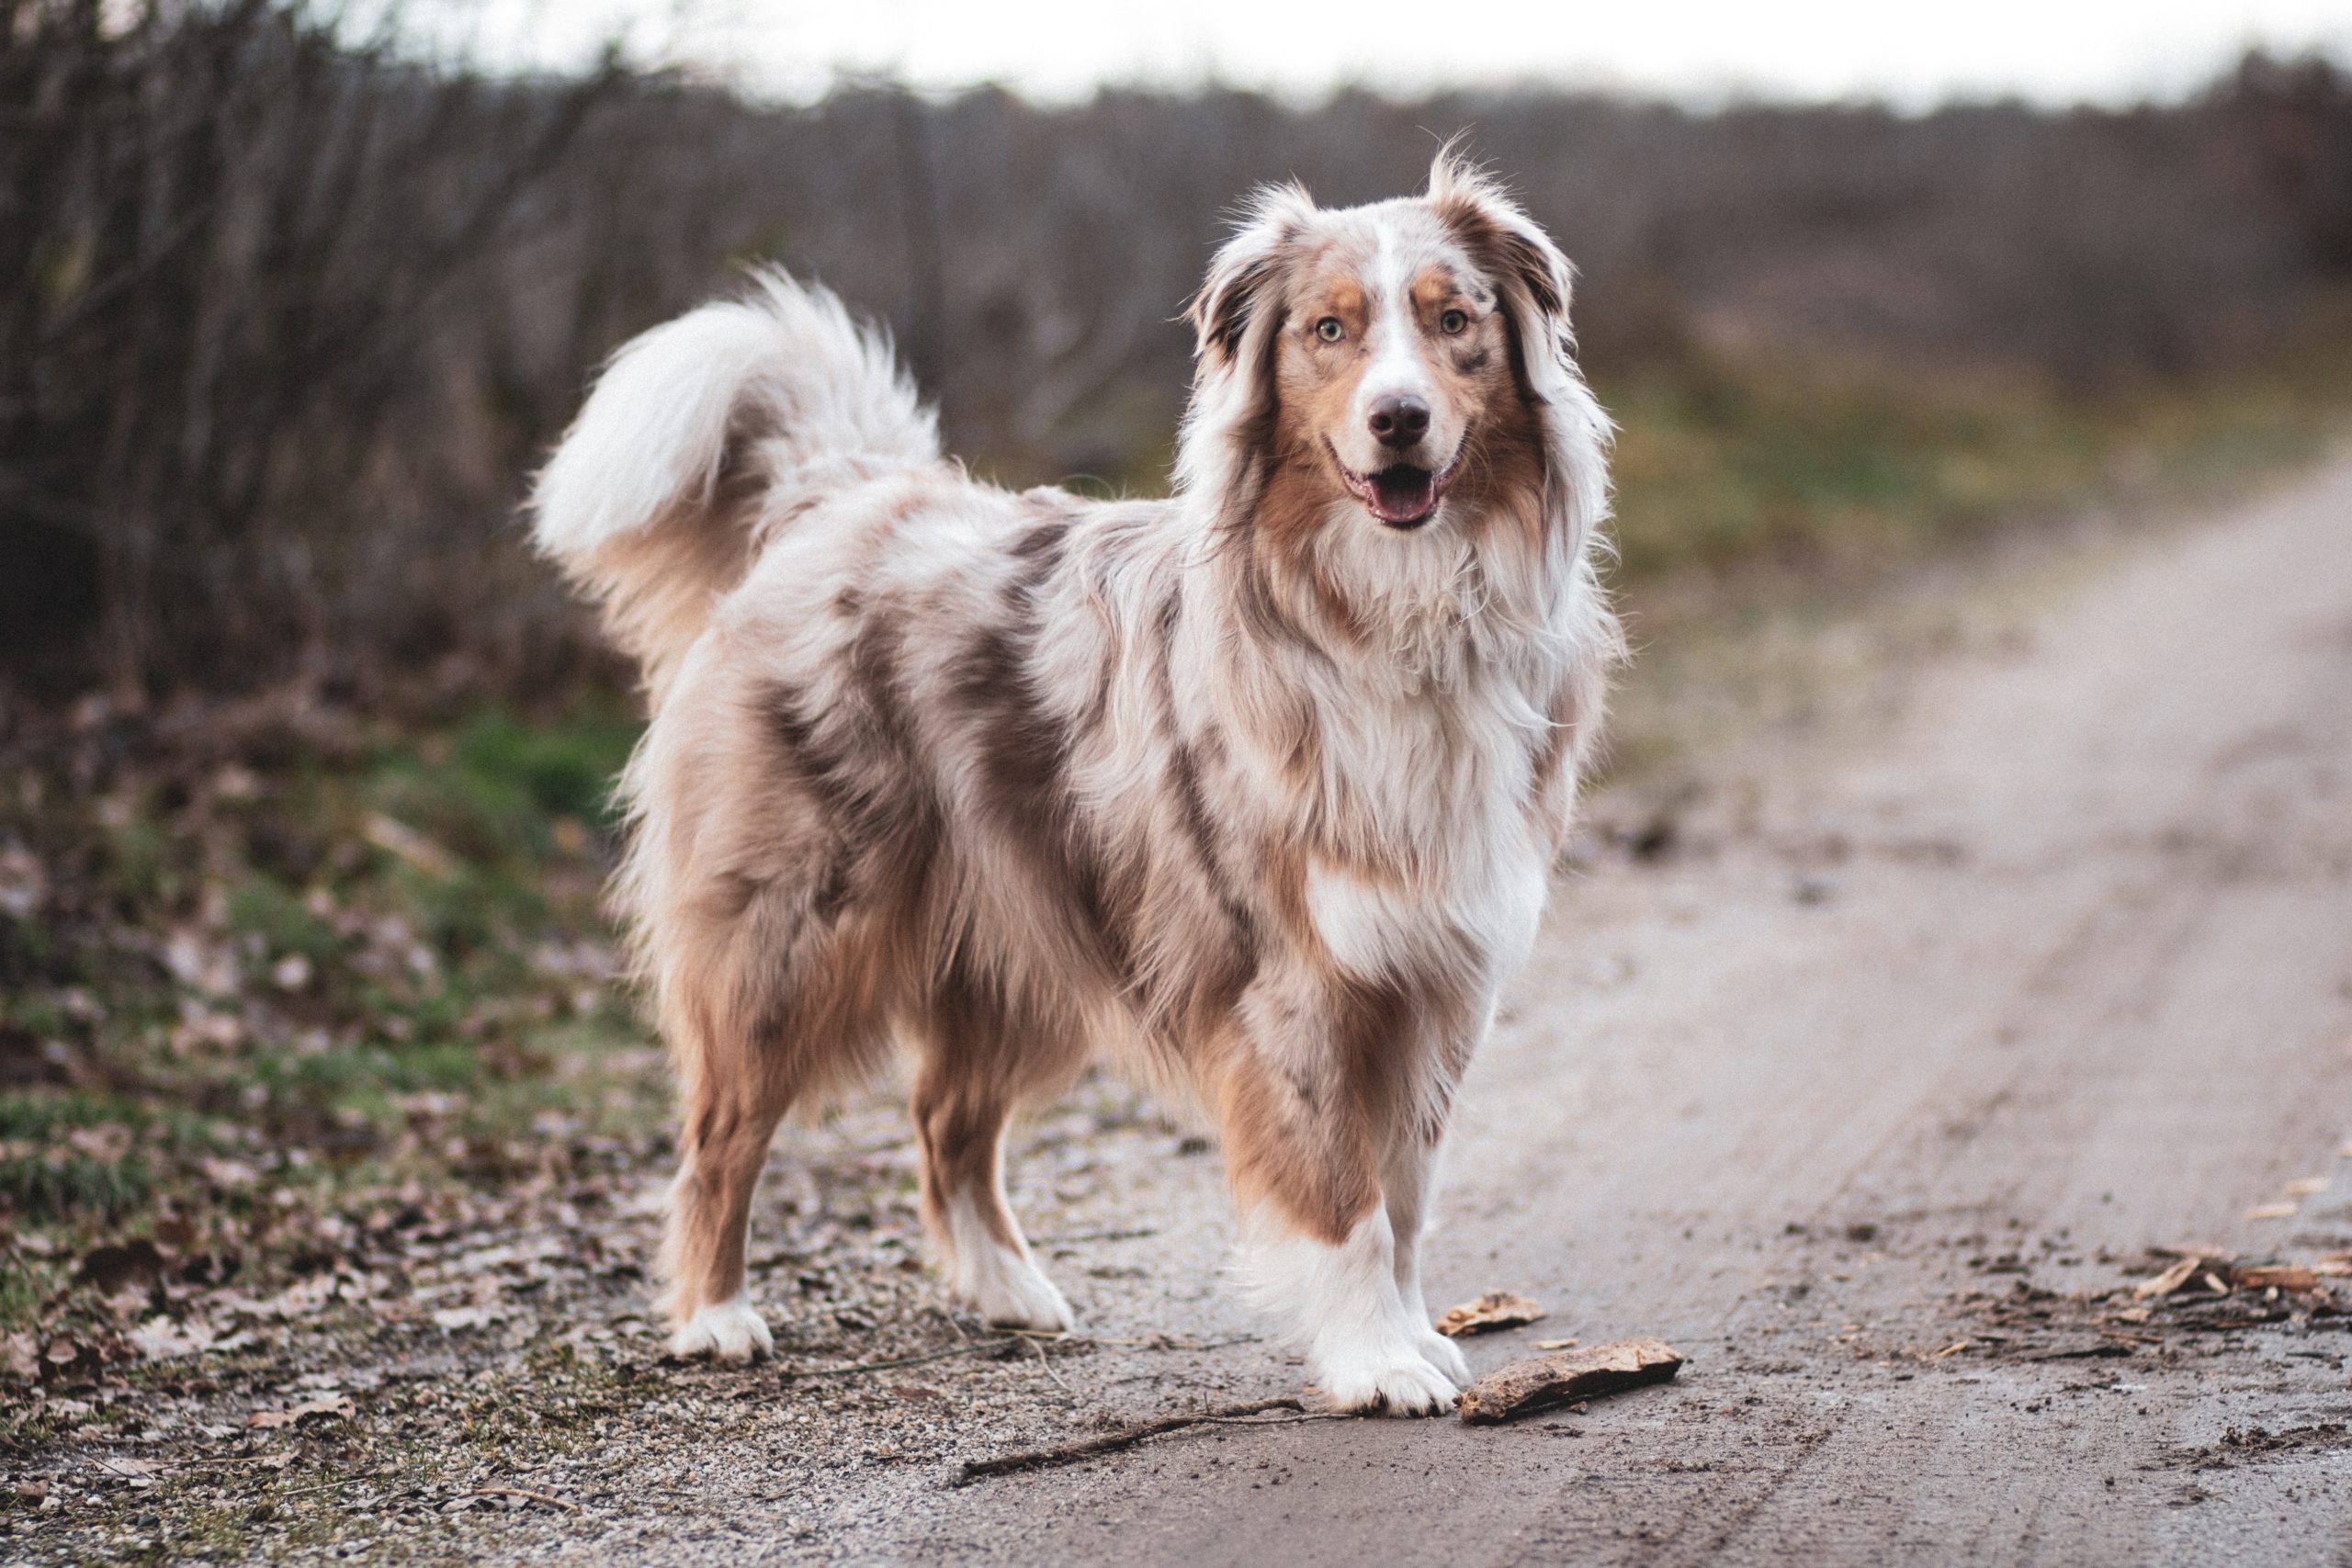 Red Merle Australian Shepherd: All the differences